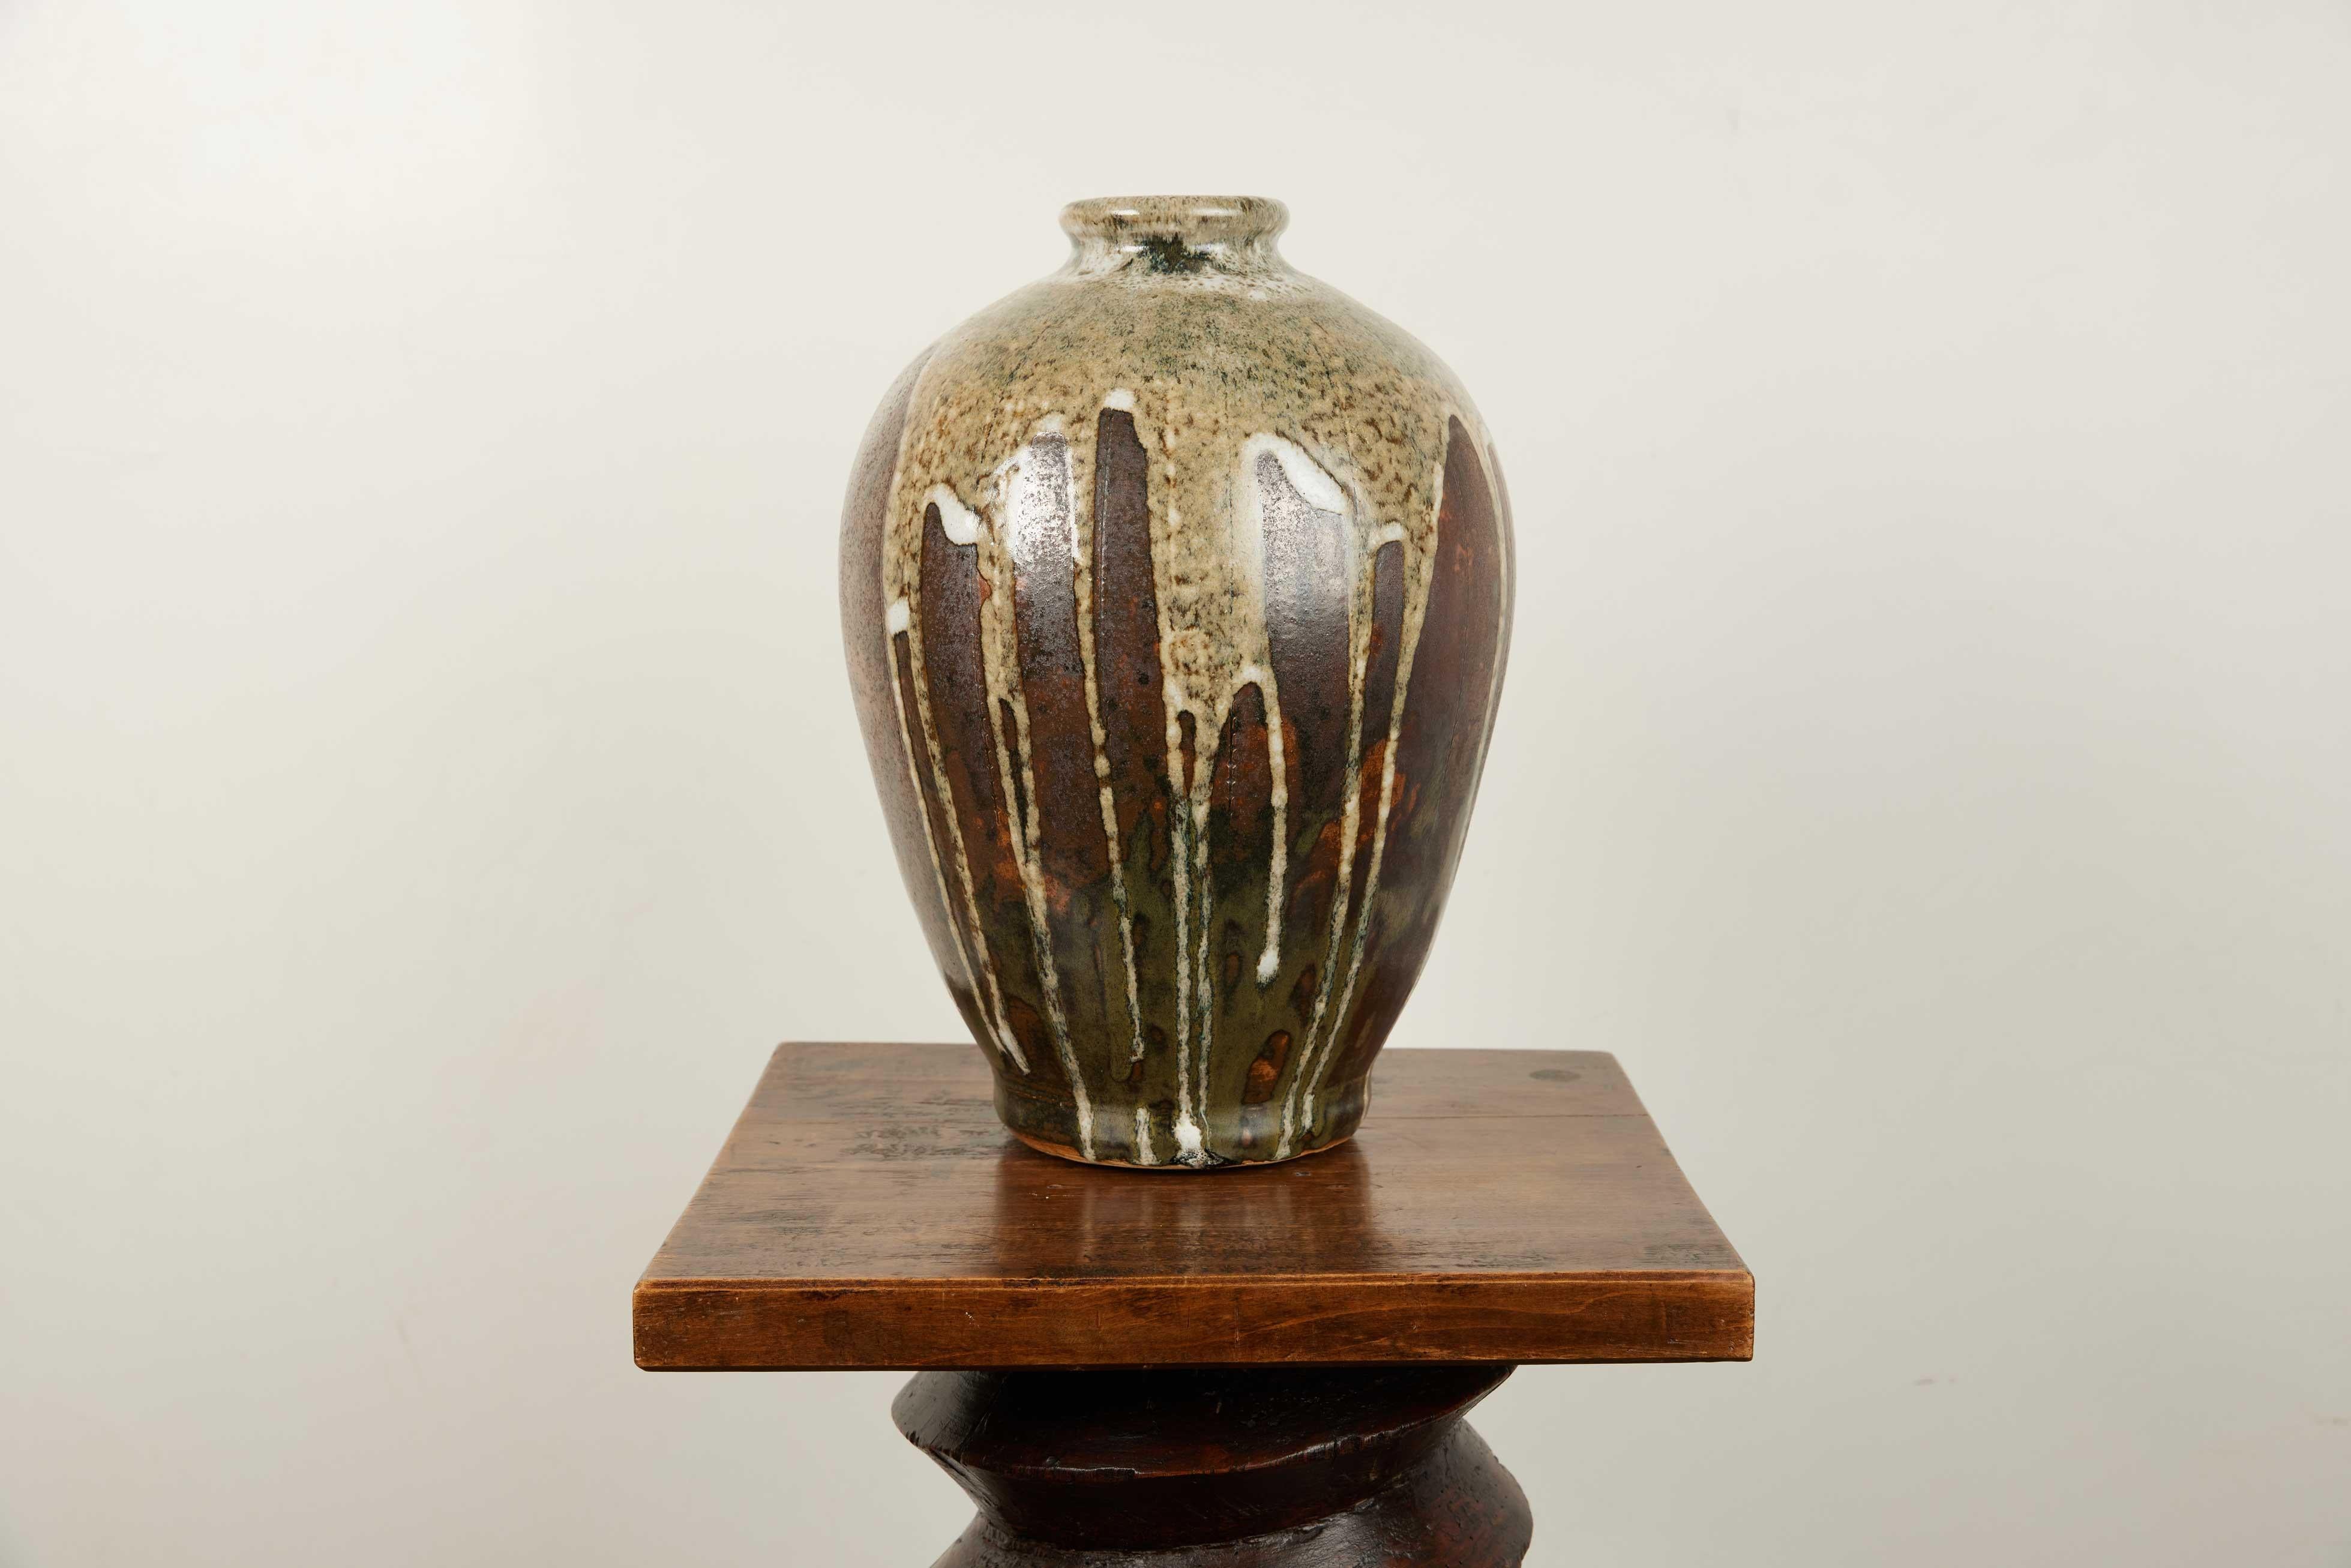 Contemporary Mid Century Wood Fired Brown Drip Vase Glazed

Discover the allure of contemporary craftsmanship blended with mid-century aesthetics in this exquisite wood-fired vase. Measuring 13 inches in height and 9 inches in diameter, this vase